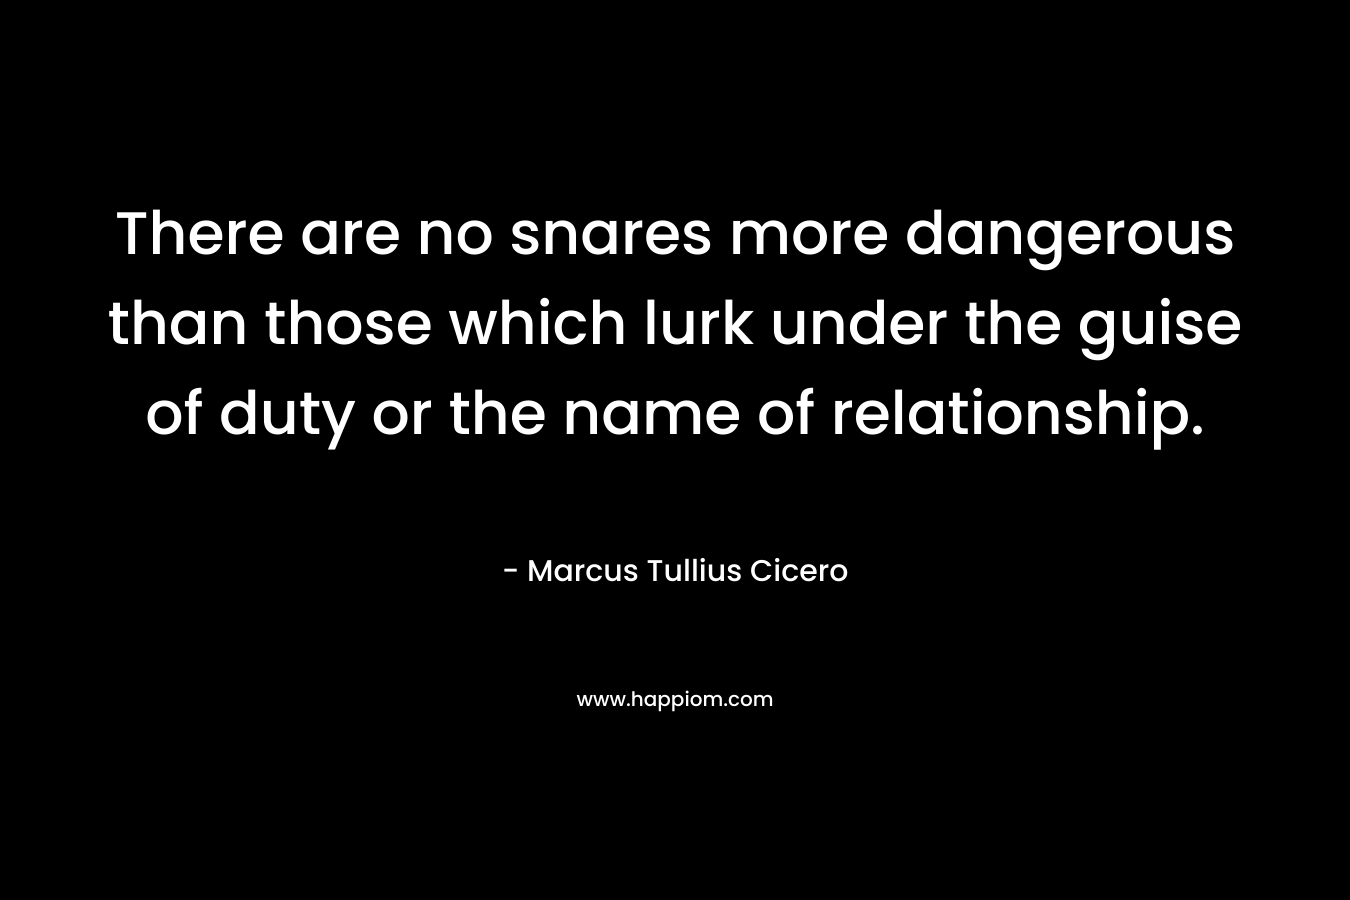 There are no snares more dangerous than those which lurk under the guise of duty or the name of relationship.